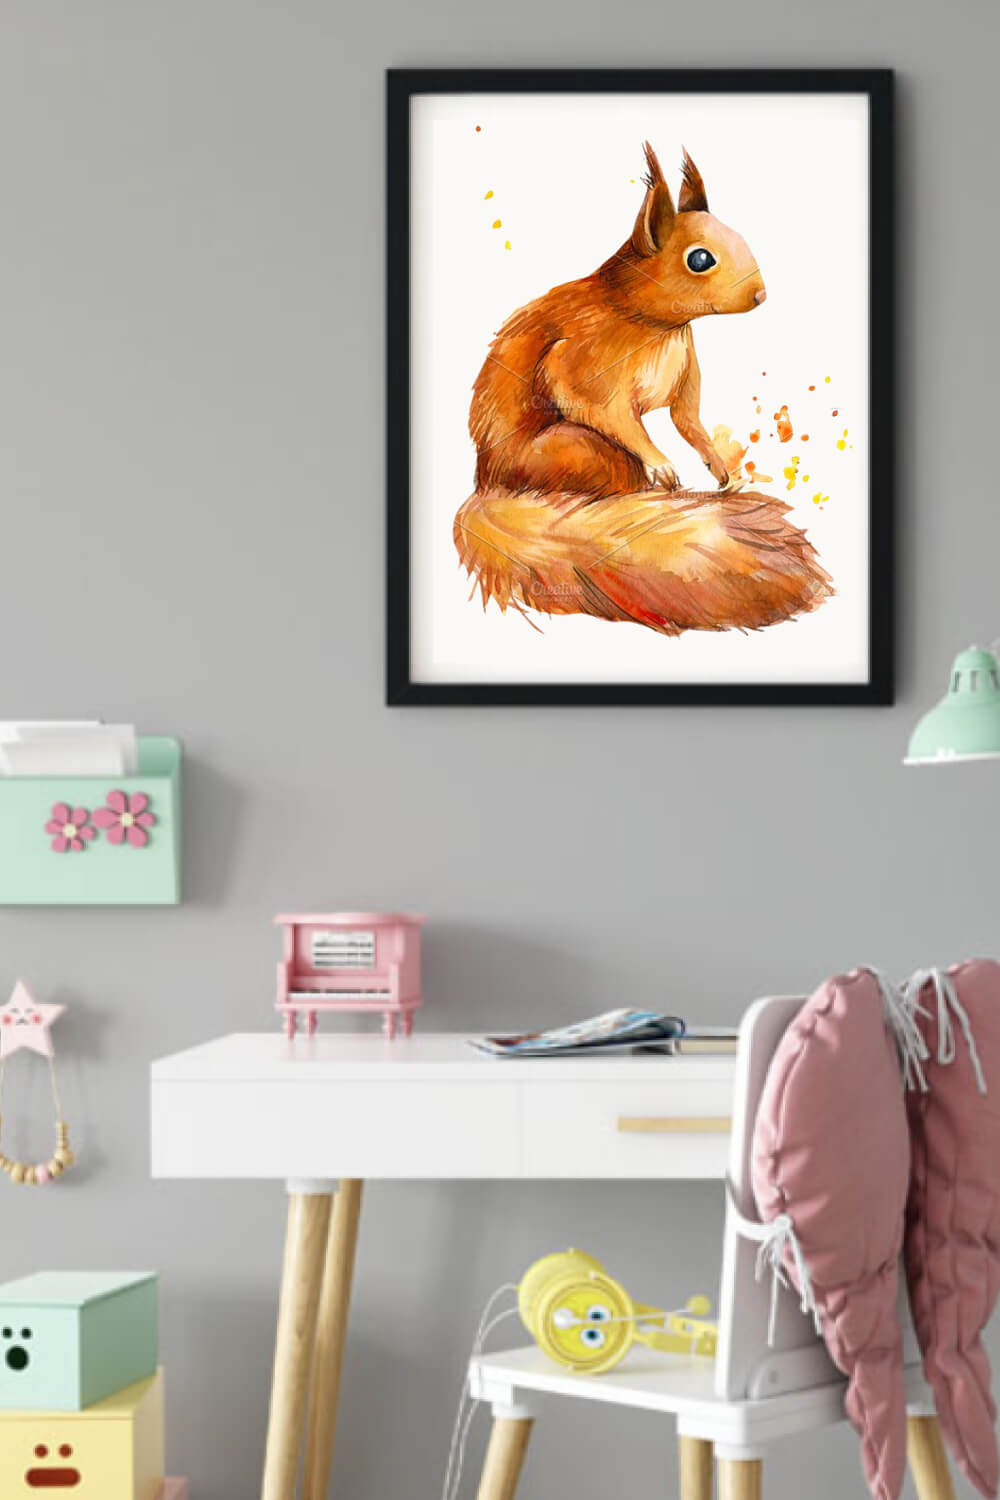 Painting of a red squirrel on a gray wall.